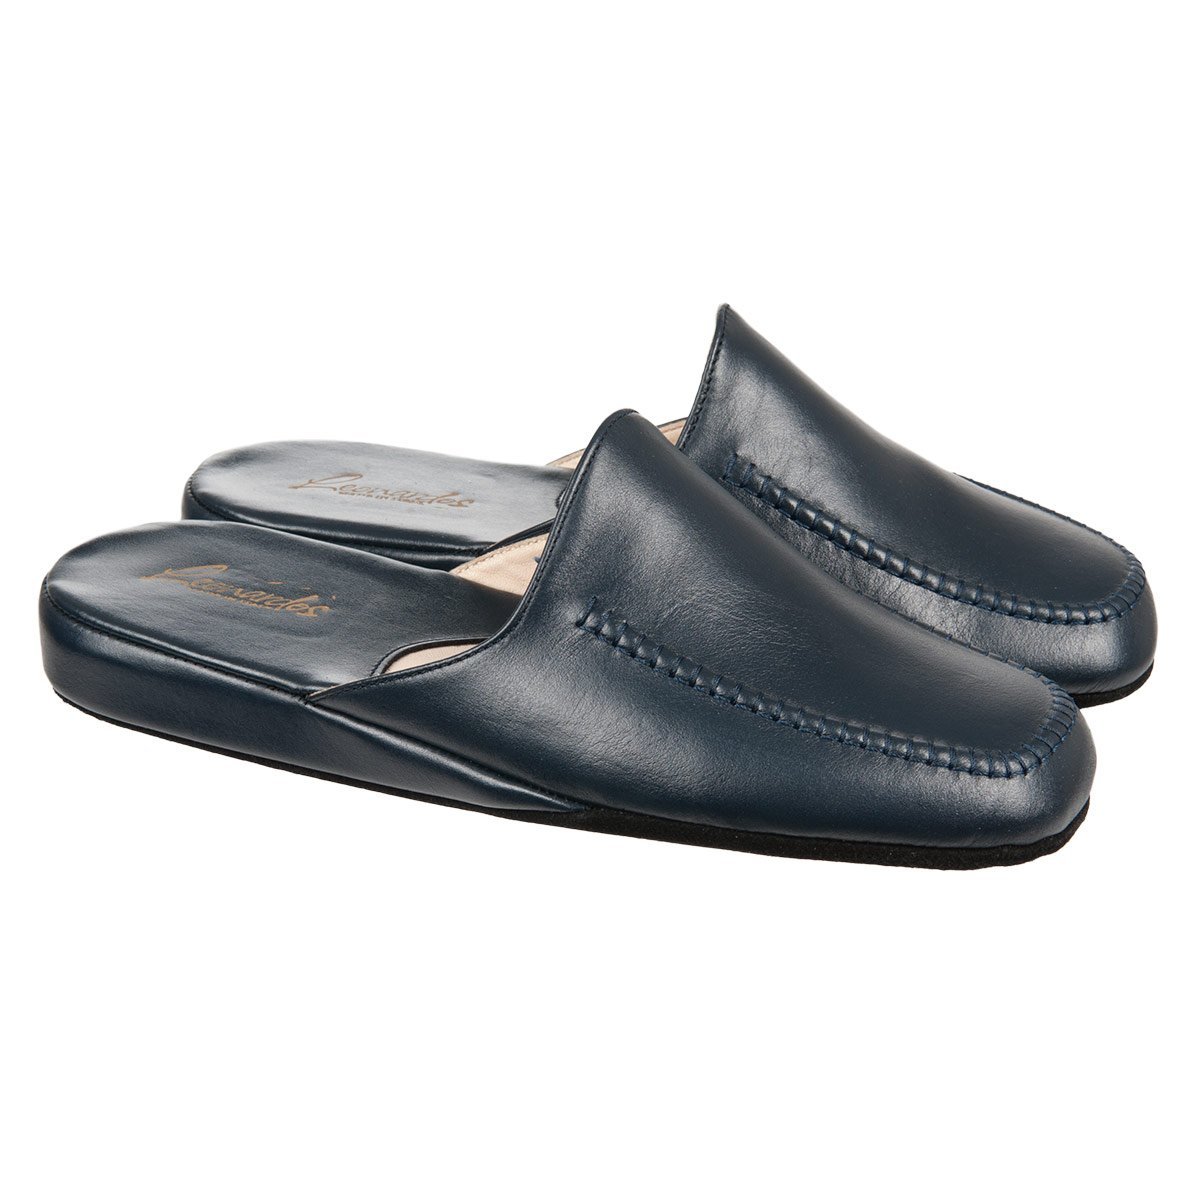 The comfortable slippers for men in leather